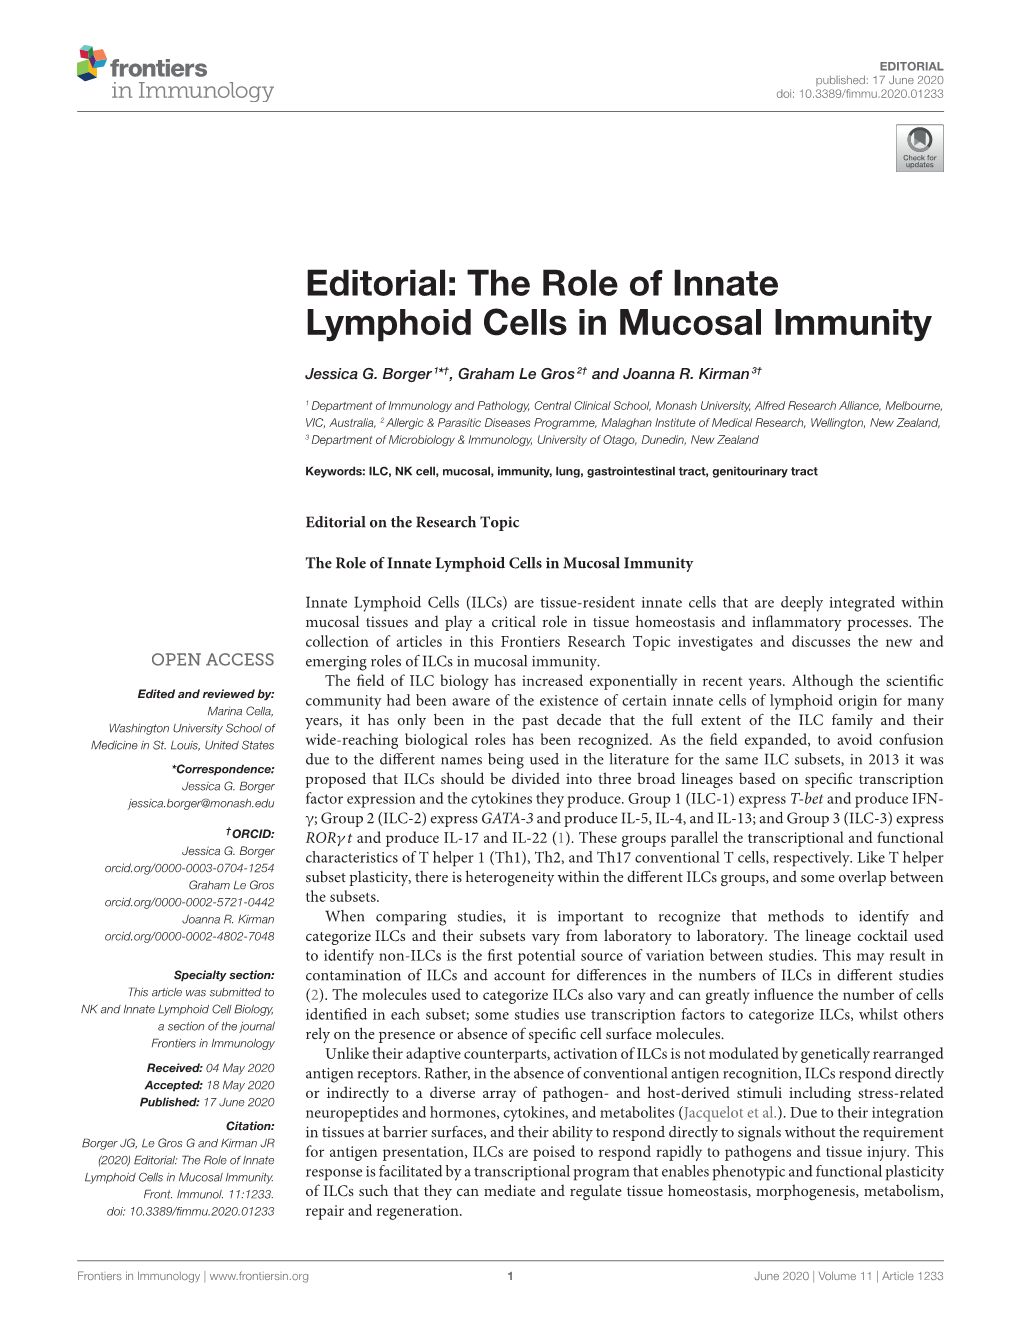 Editorial: the Role of Innate Lymphoid Cells in Mucosal Immunity